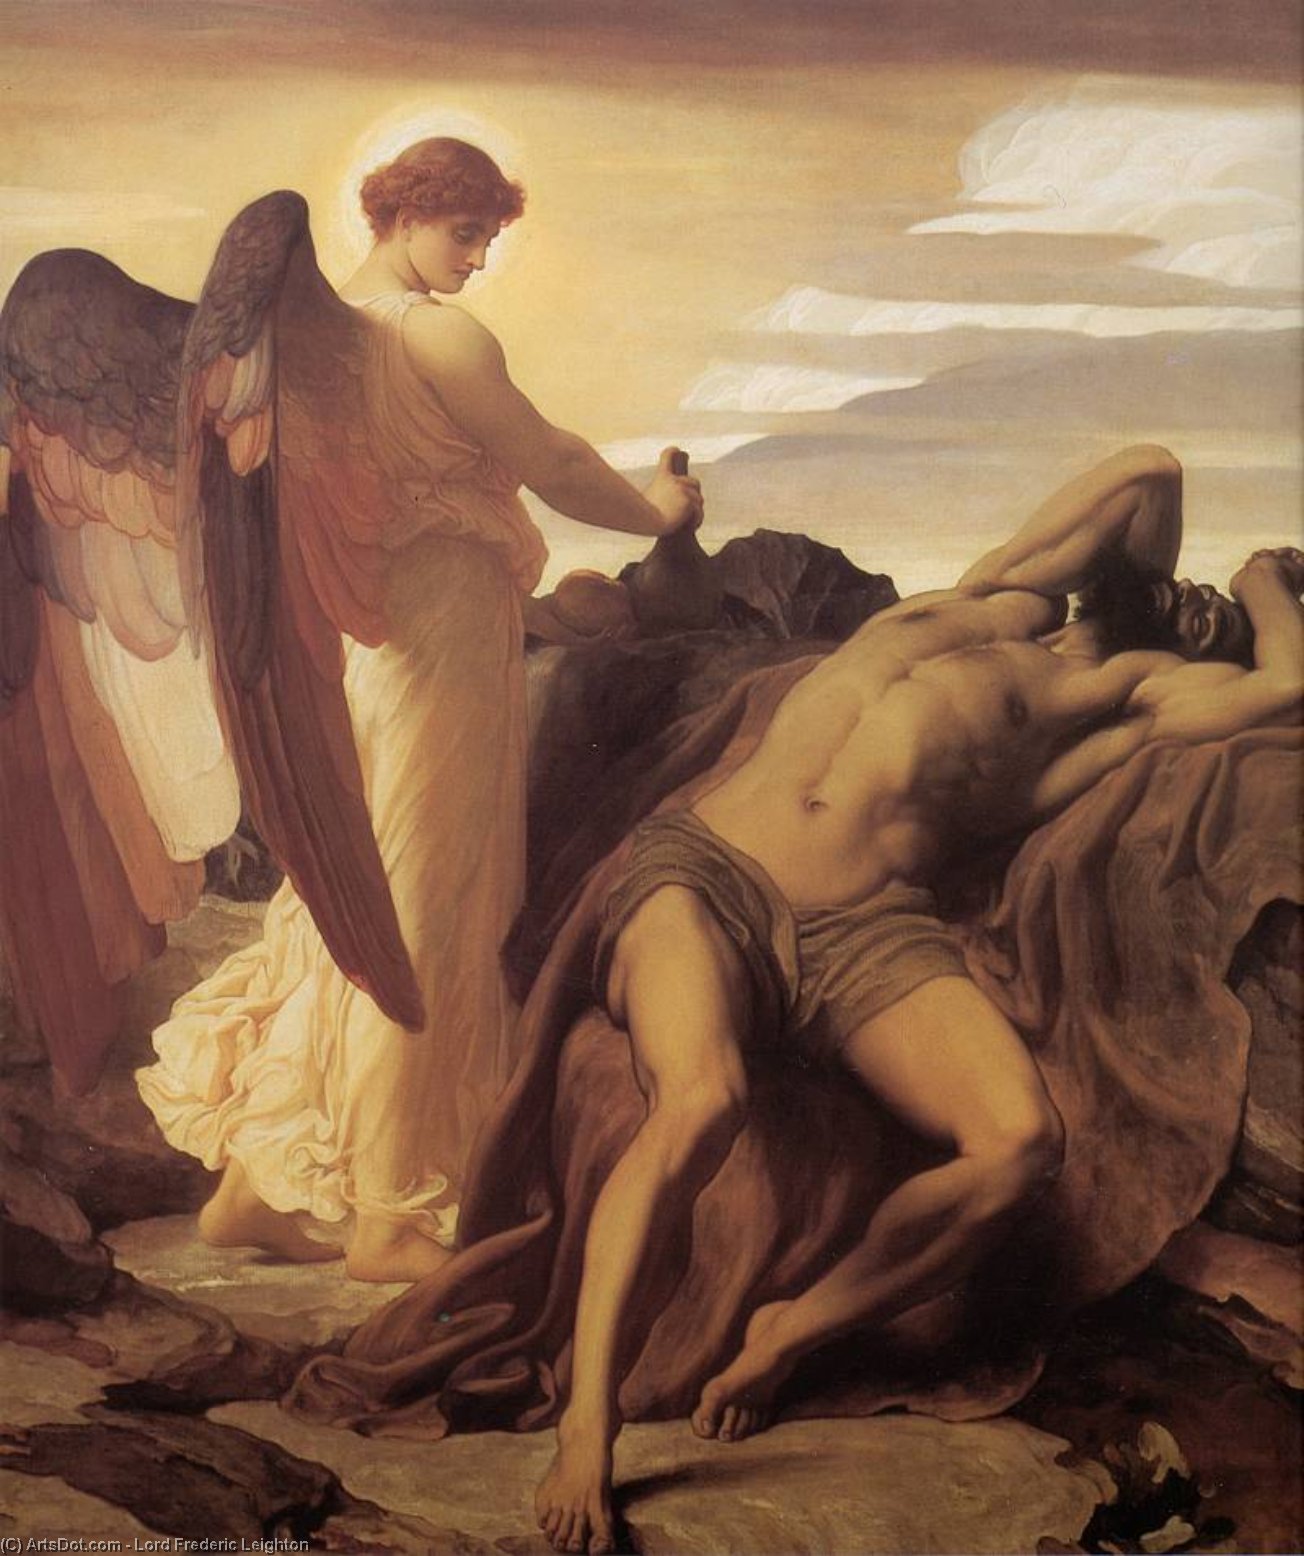 Order Paintings Reproductions Elijah in the Wilderness by Lord Frederic Leighton | ArtsDot.com